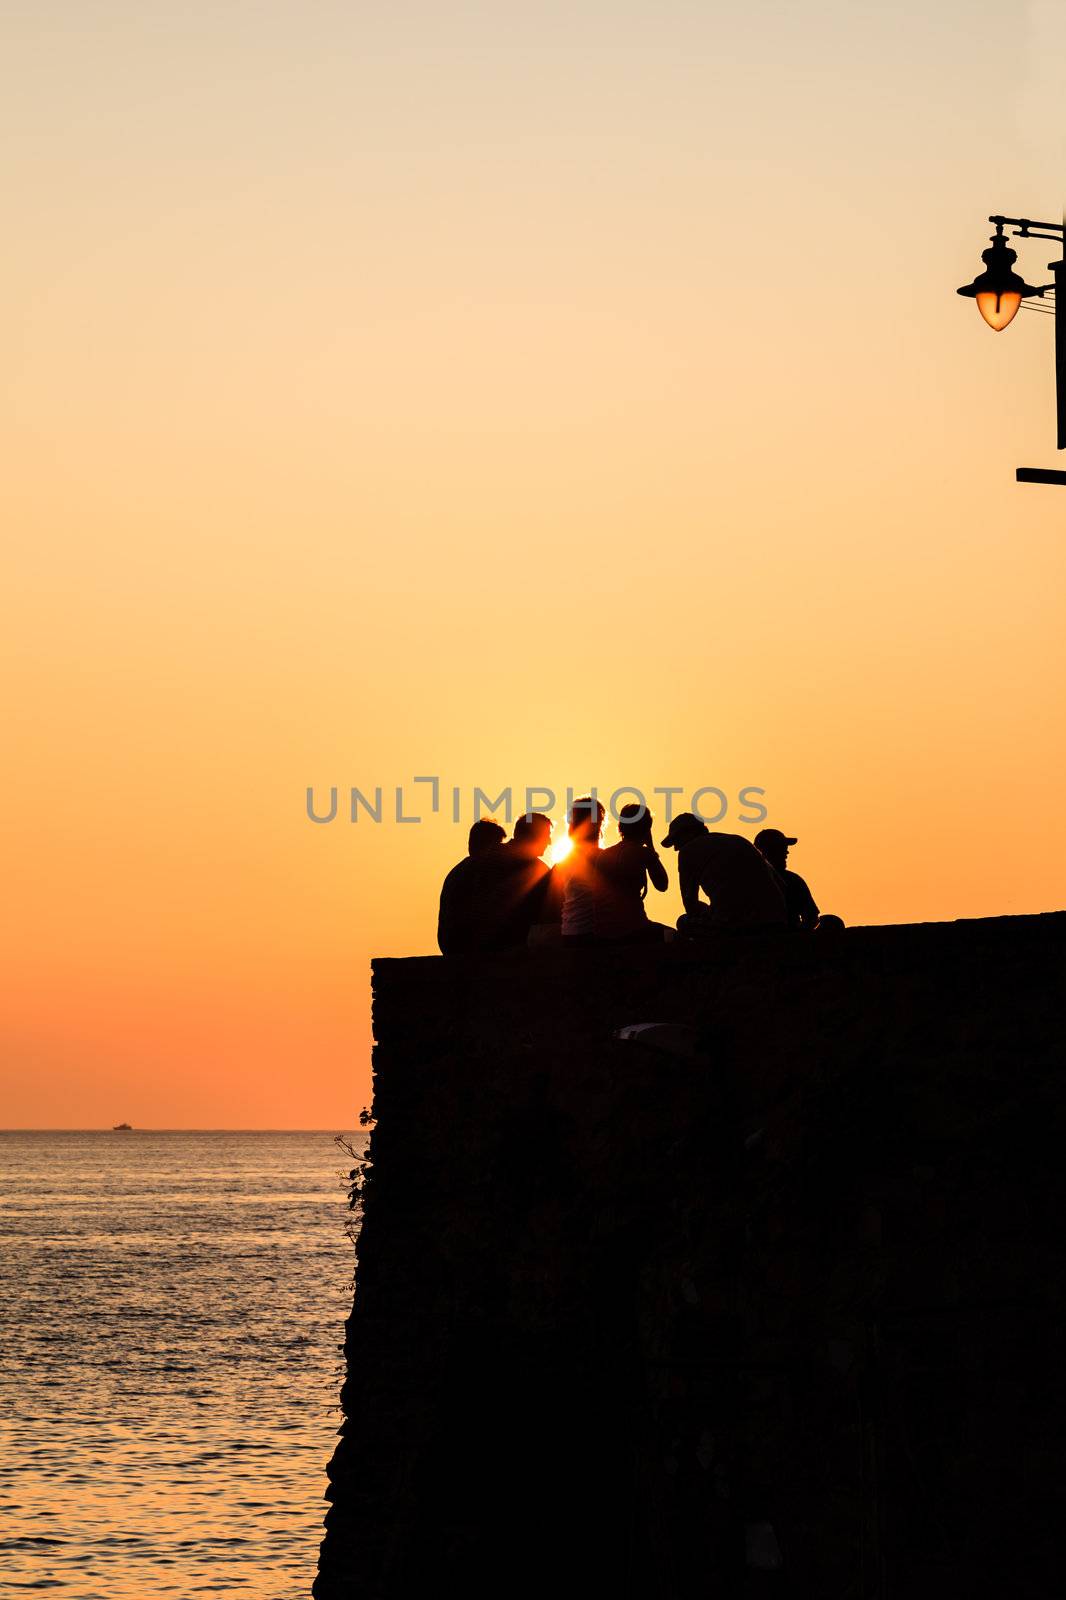 Group of People Watching Sunset in Riomaggiore, Italy by anshar